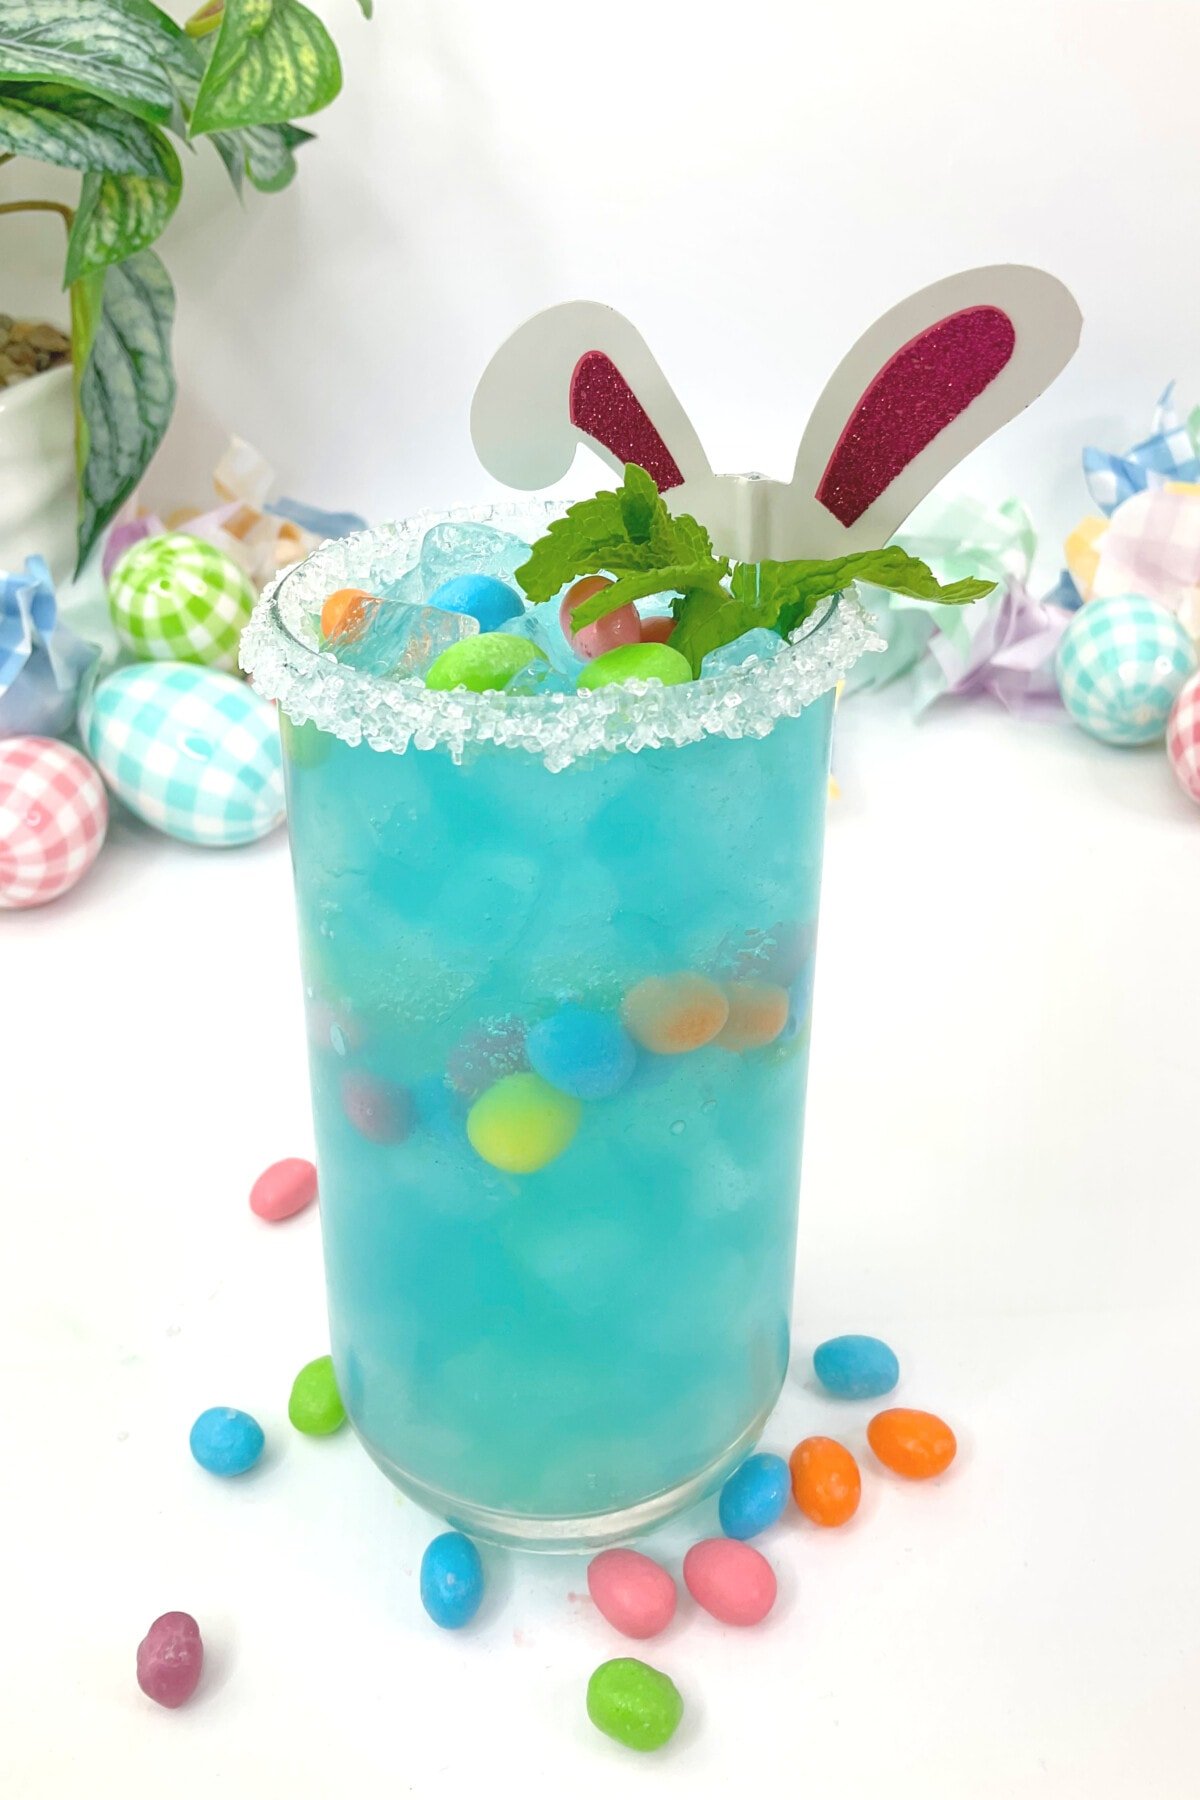 Jelly Bean Cocktail with candies all around it.